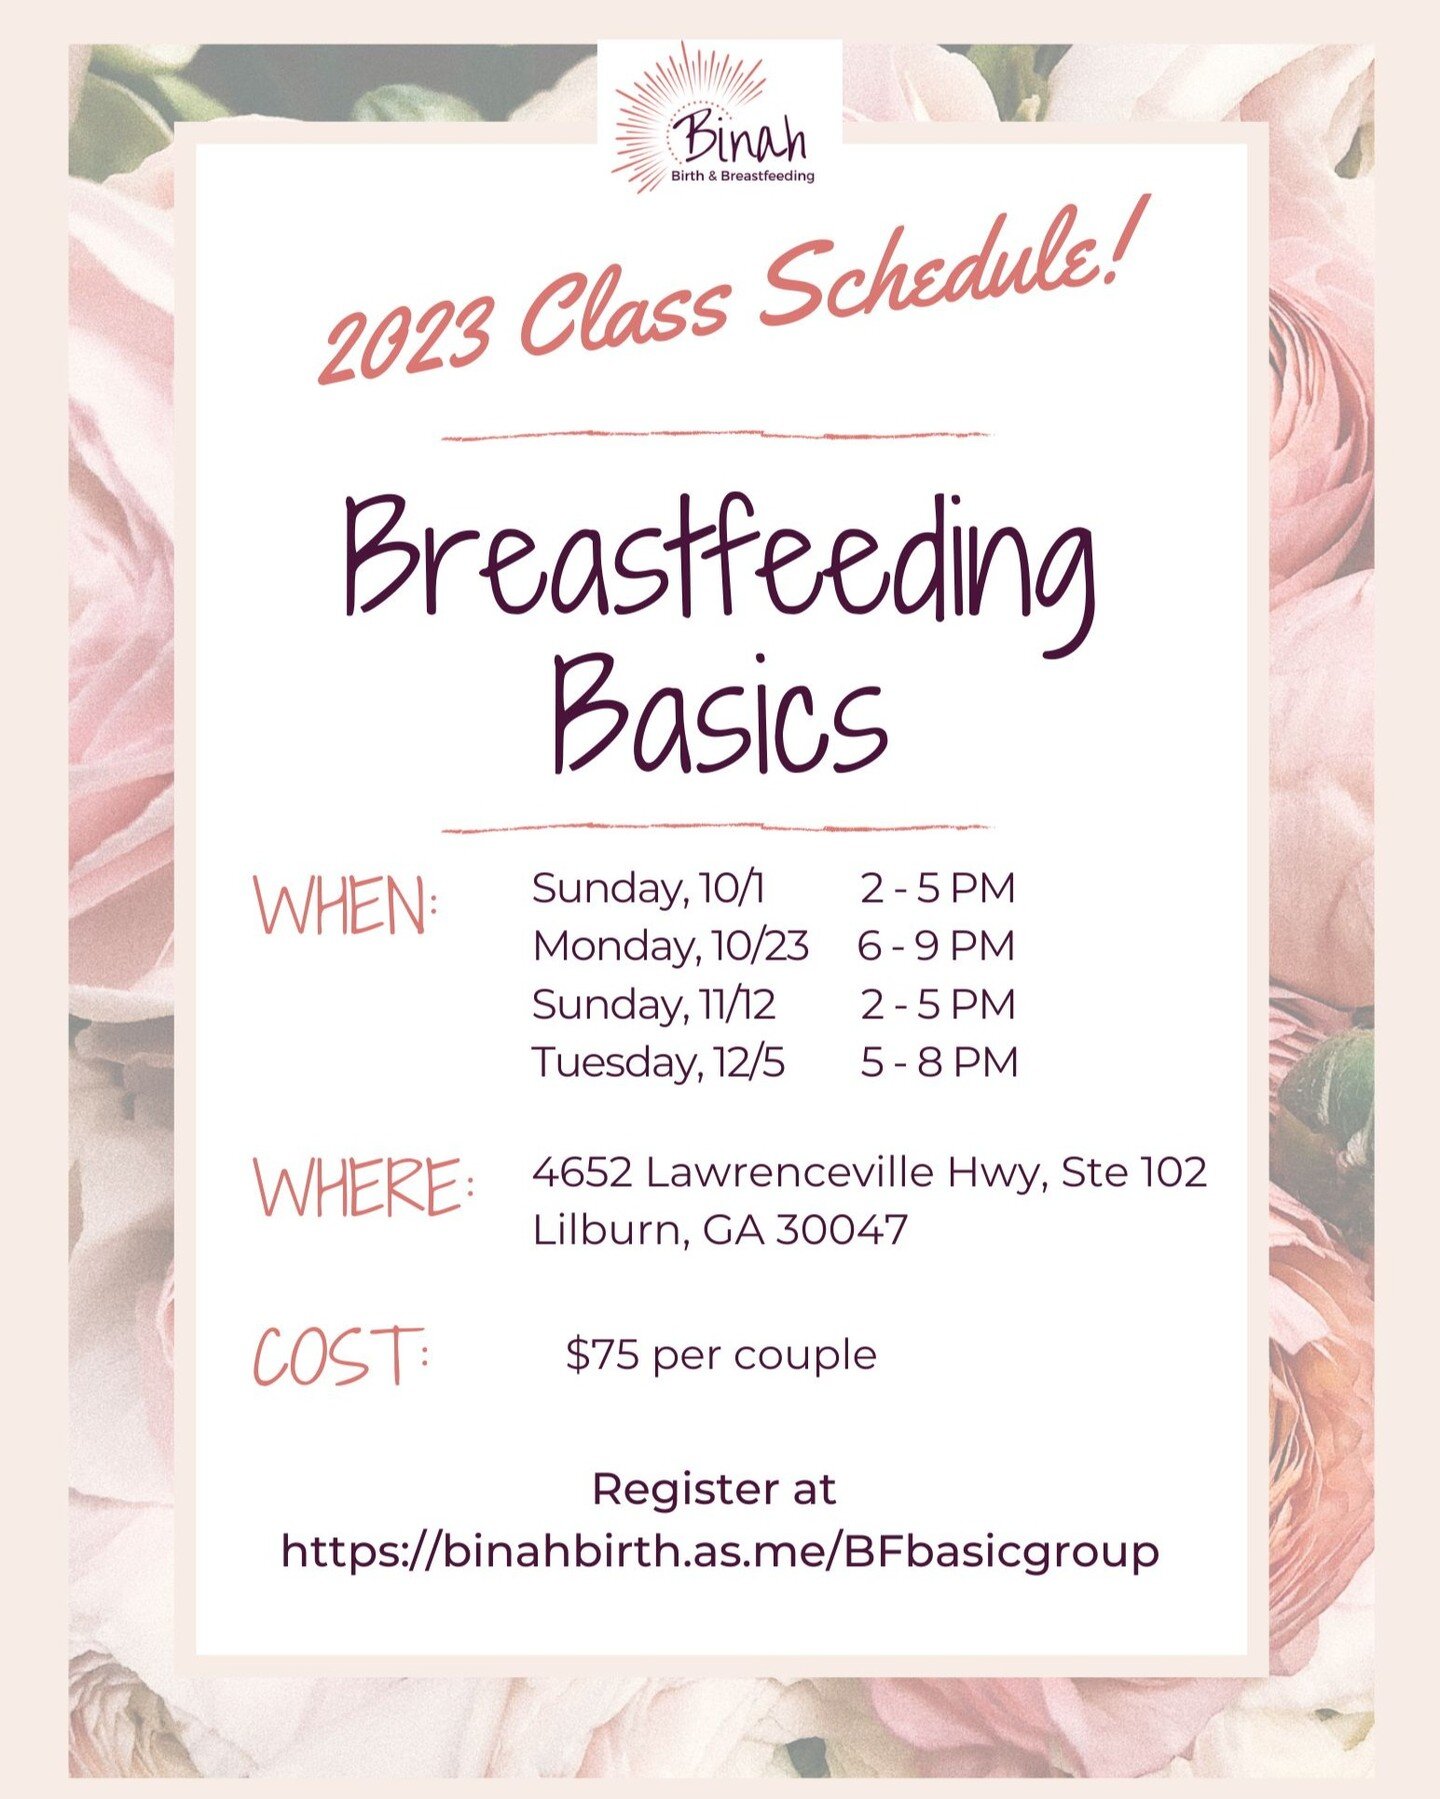 Planning to breastfeed &amp; looking to get the best information to get you started on your journey? Join us for one of our last four classes of 2023! Each class is taught by our midwife &amp; IBCLC, Shoshanah. 

For more details &amp; to register, v